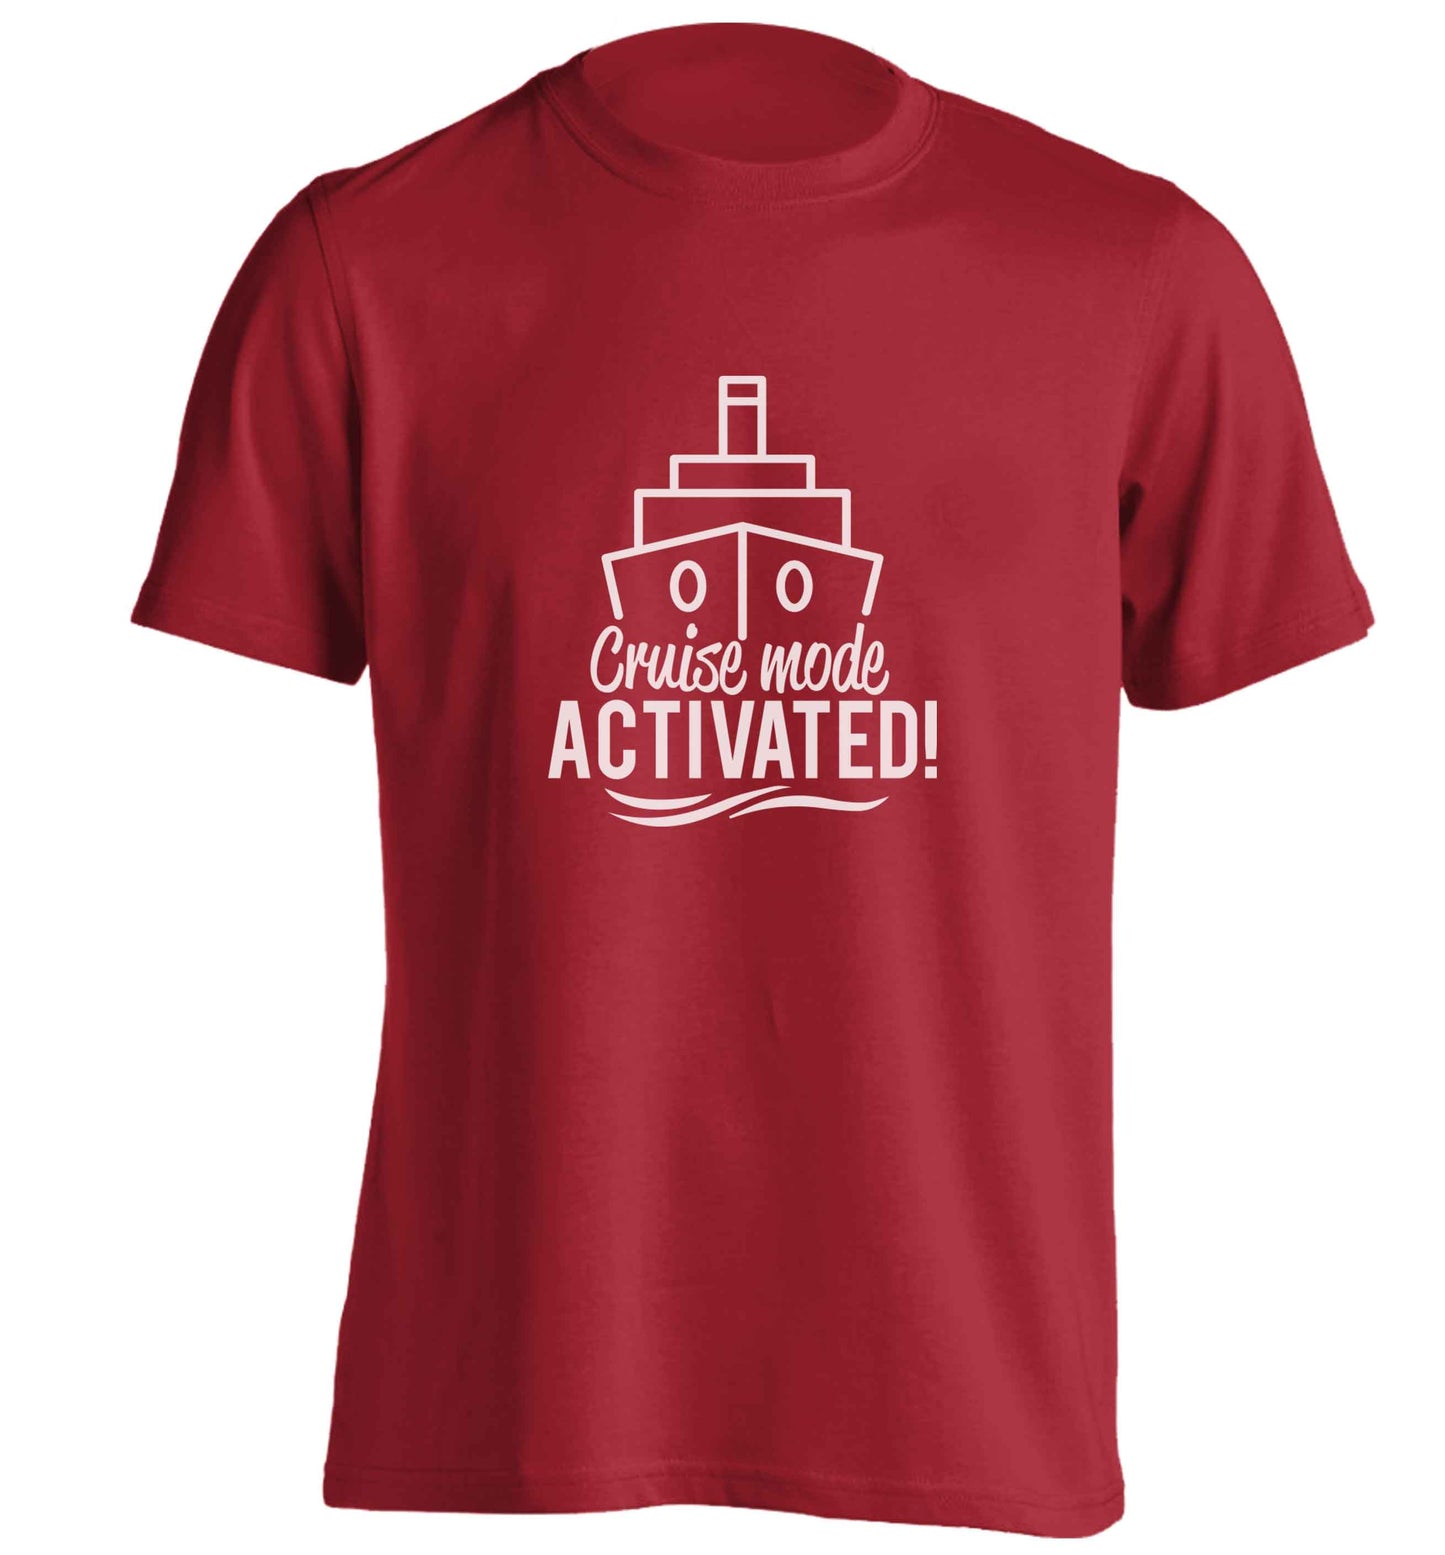 Cruise mode activated adults unisex red Tshirt 2XL